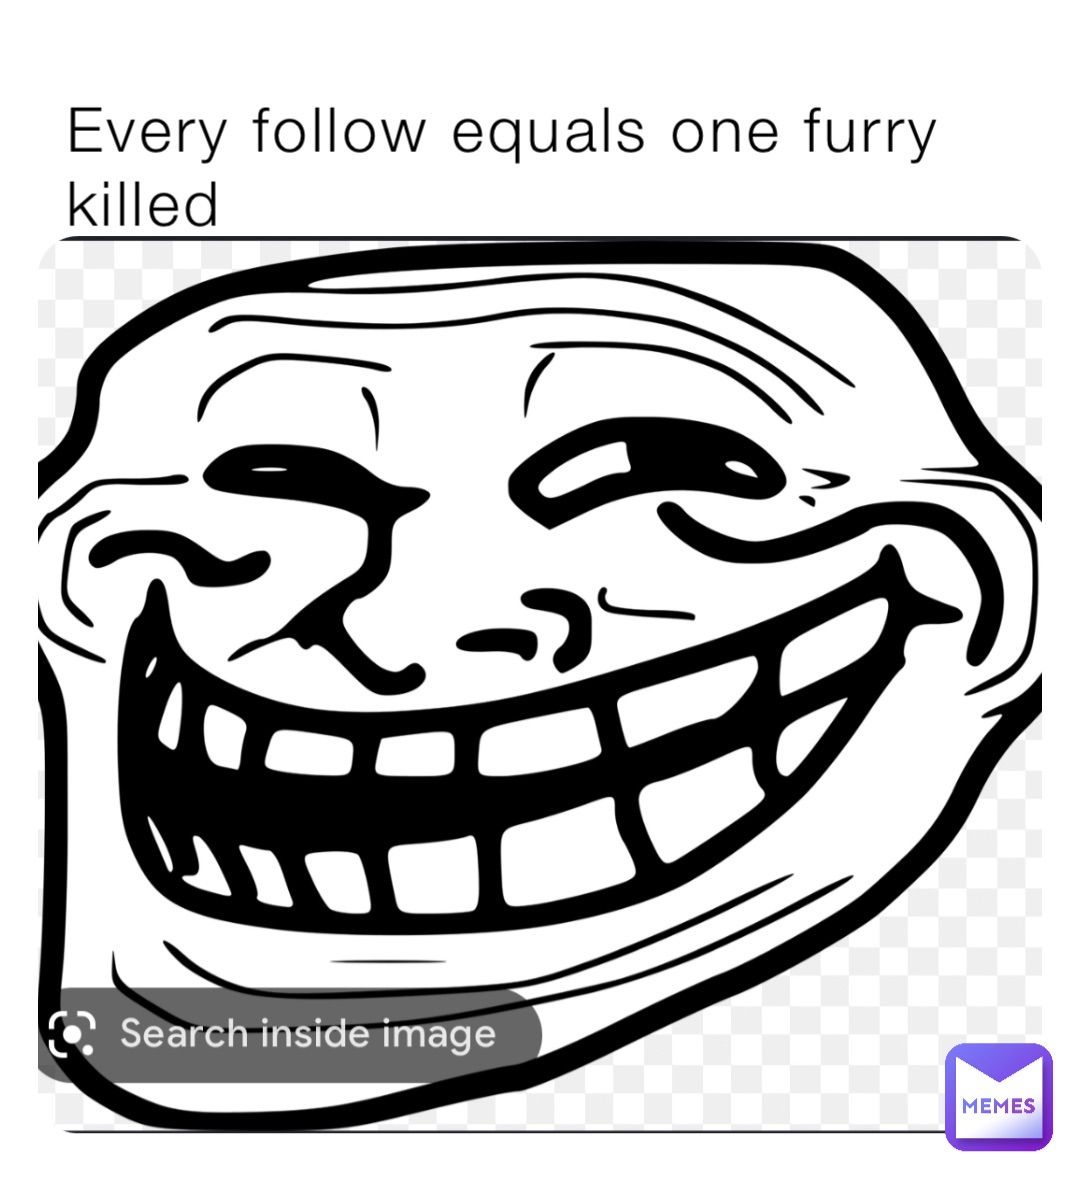 Every follow equals one furry killed